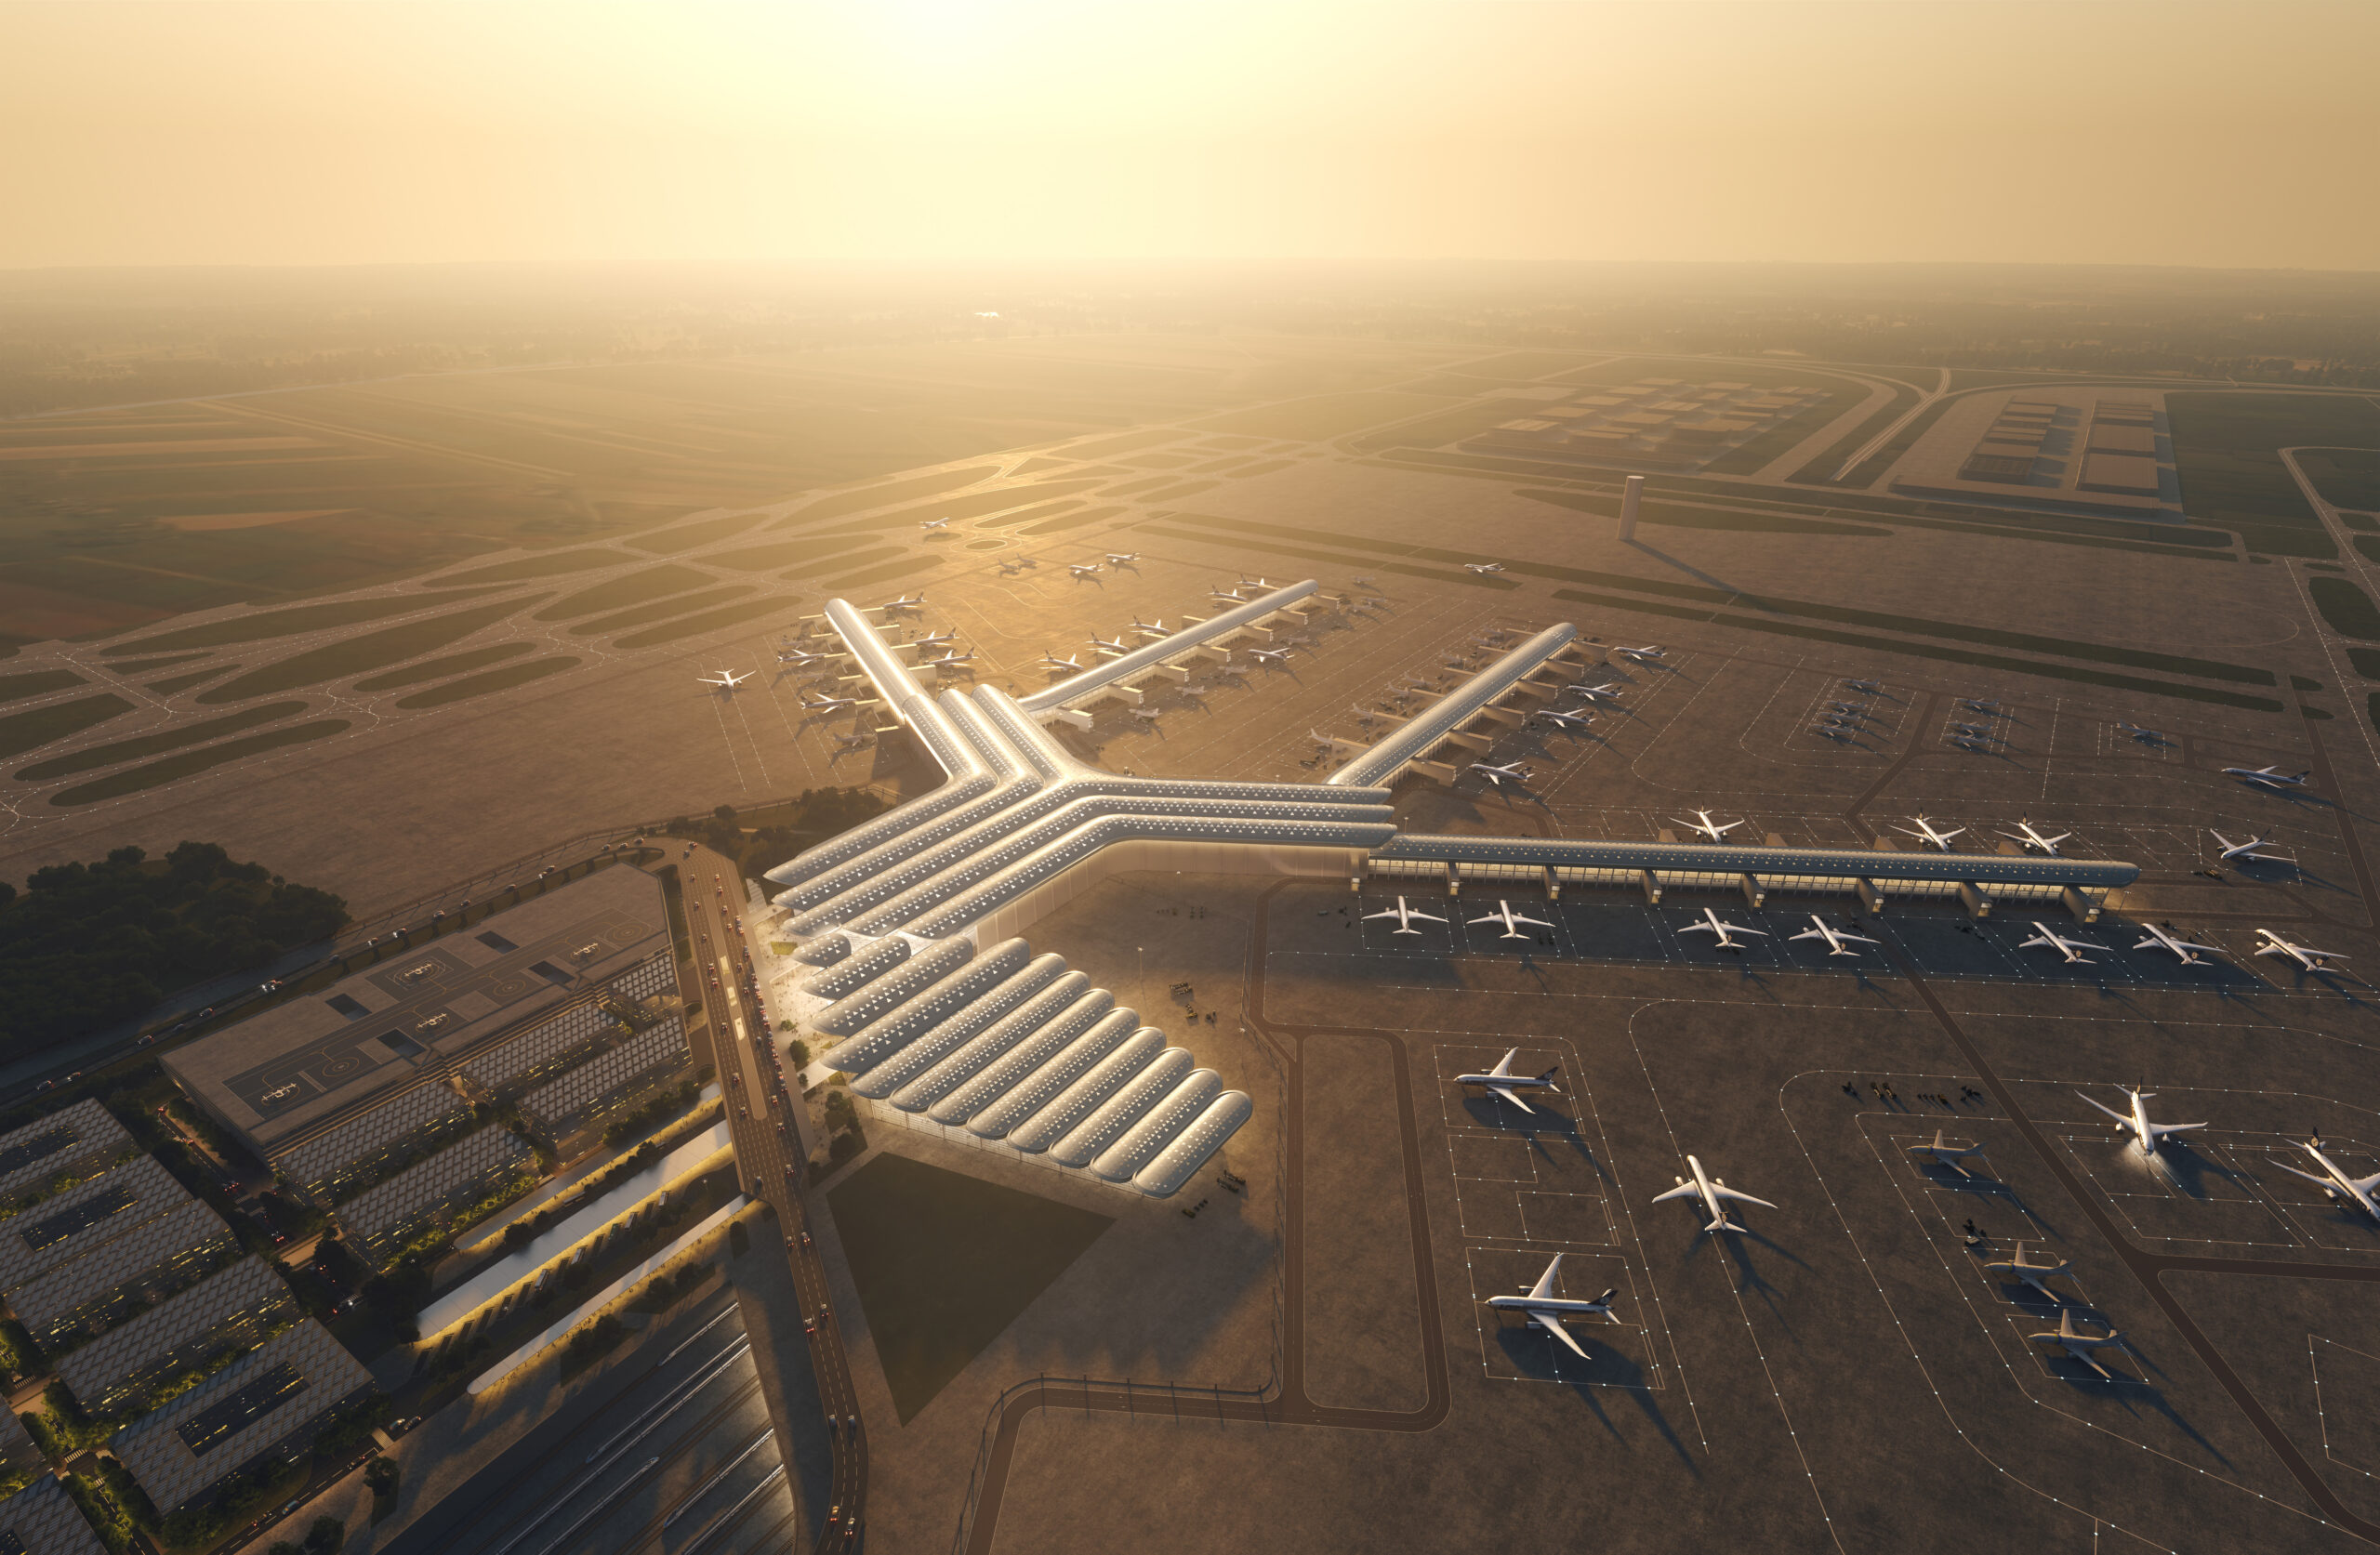 Rendering of the airside exterior of the CPK airport